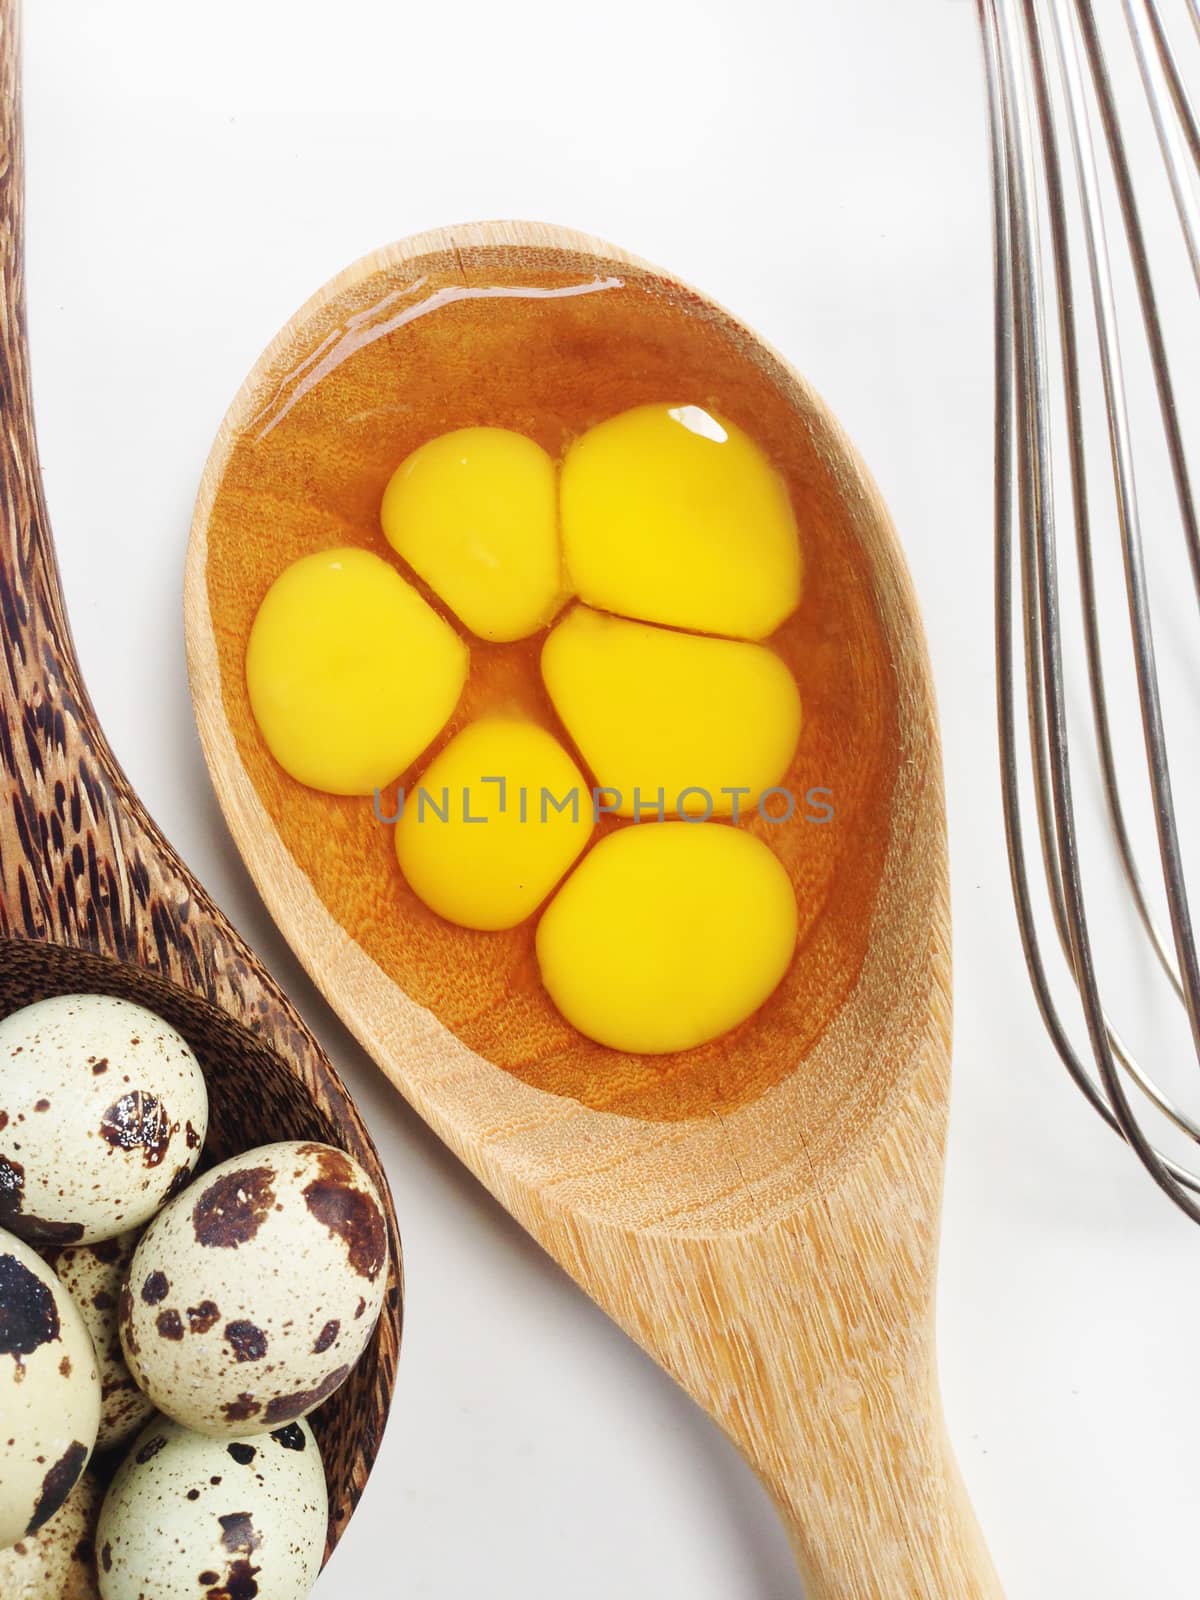 Quail eggs in wooden spoon and egg whisk on white background